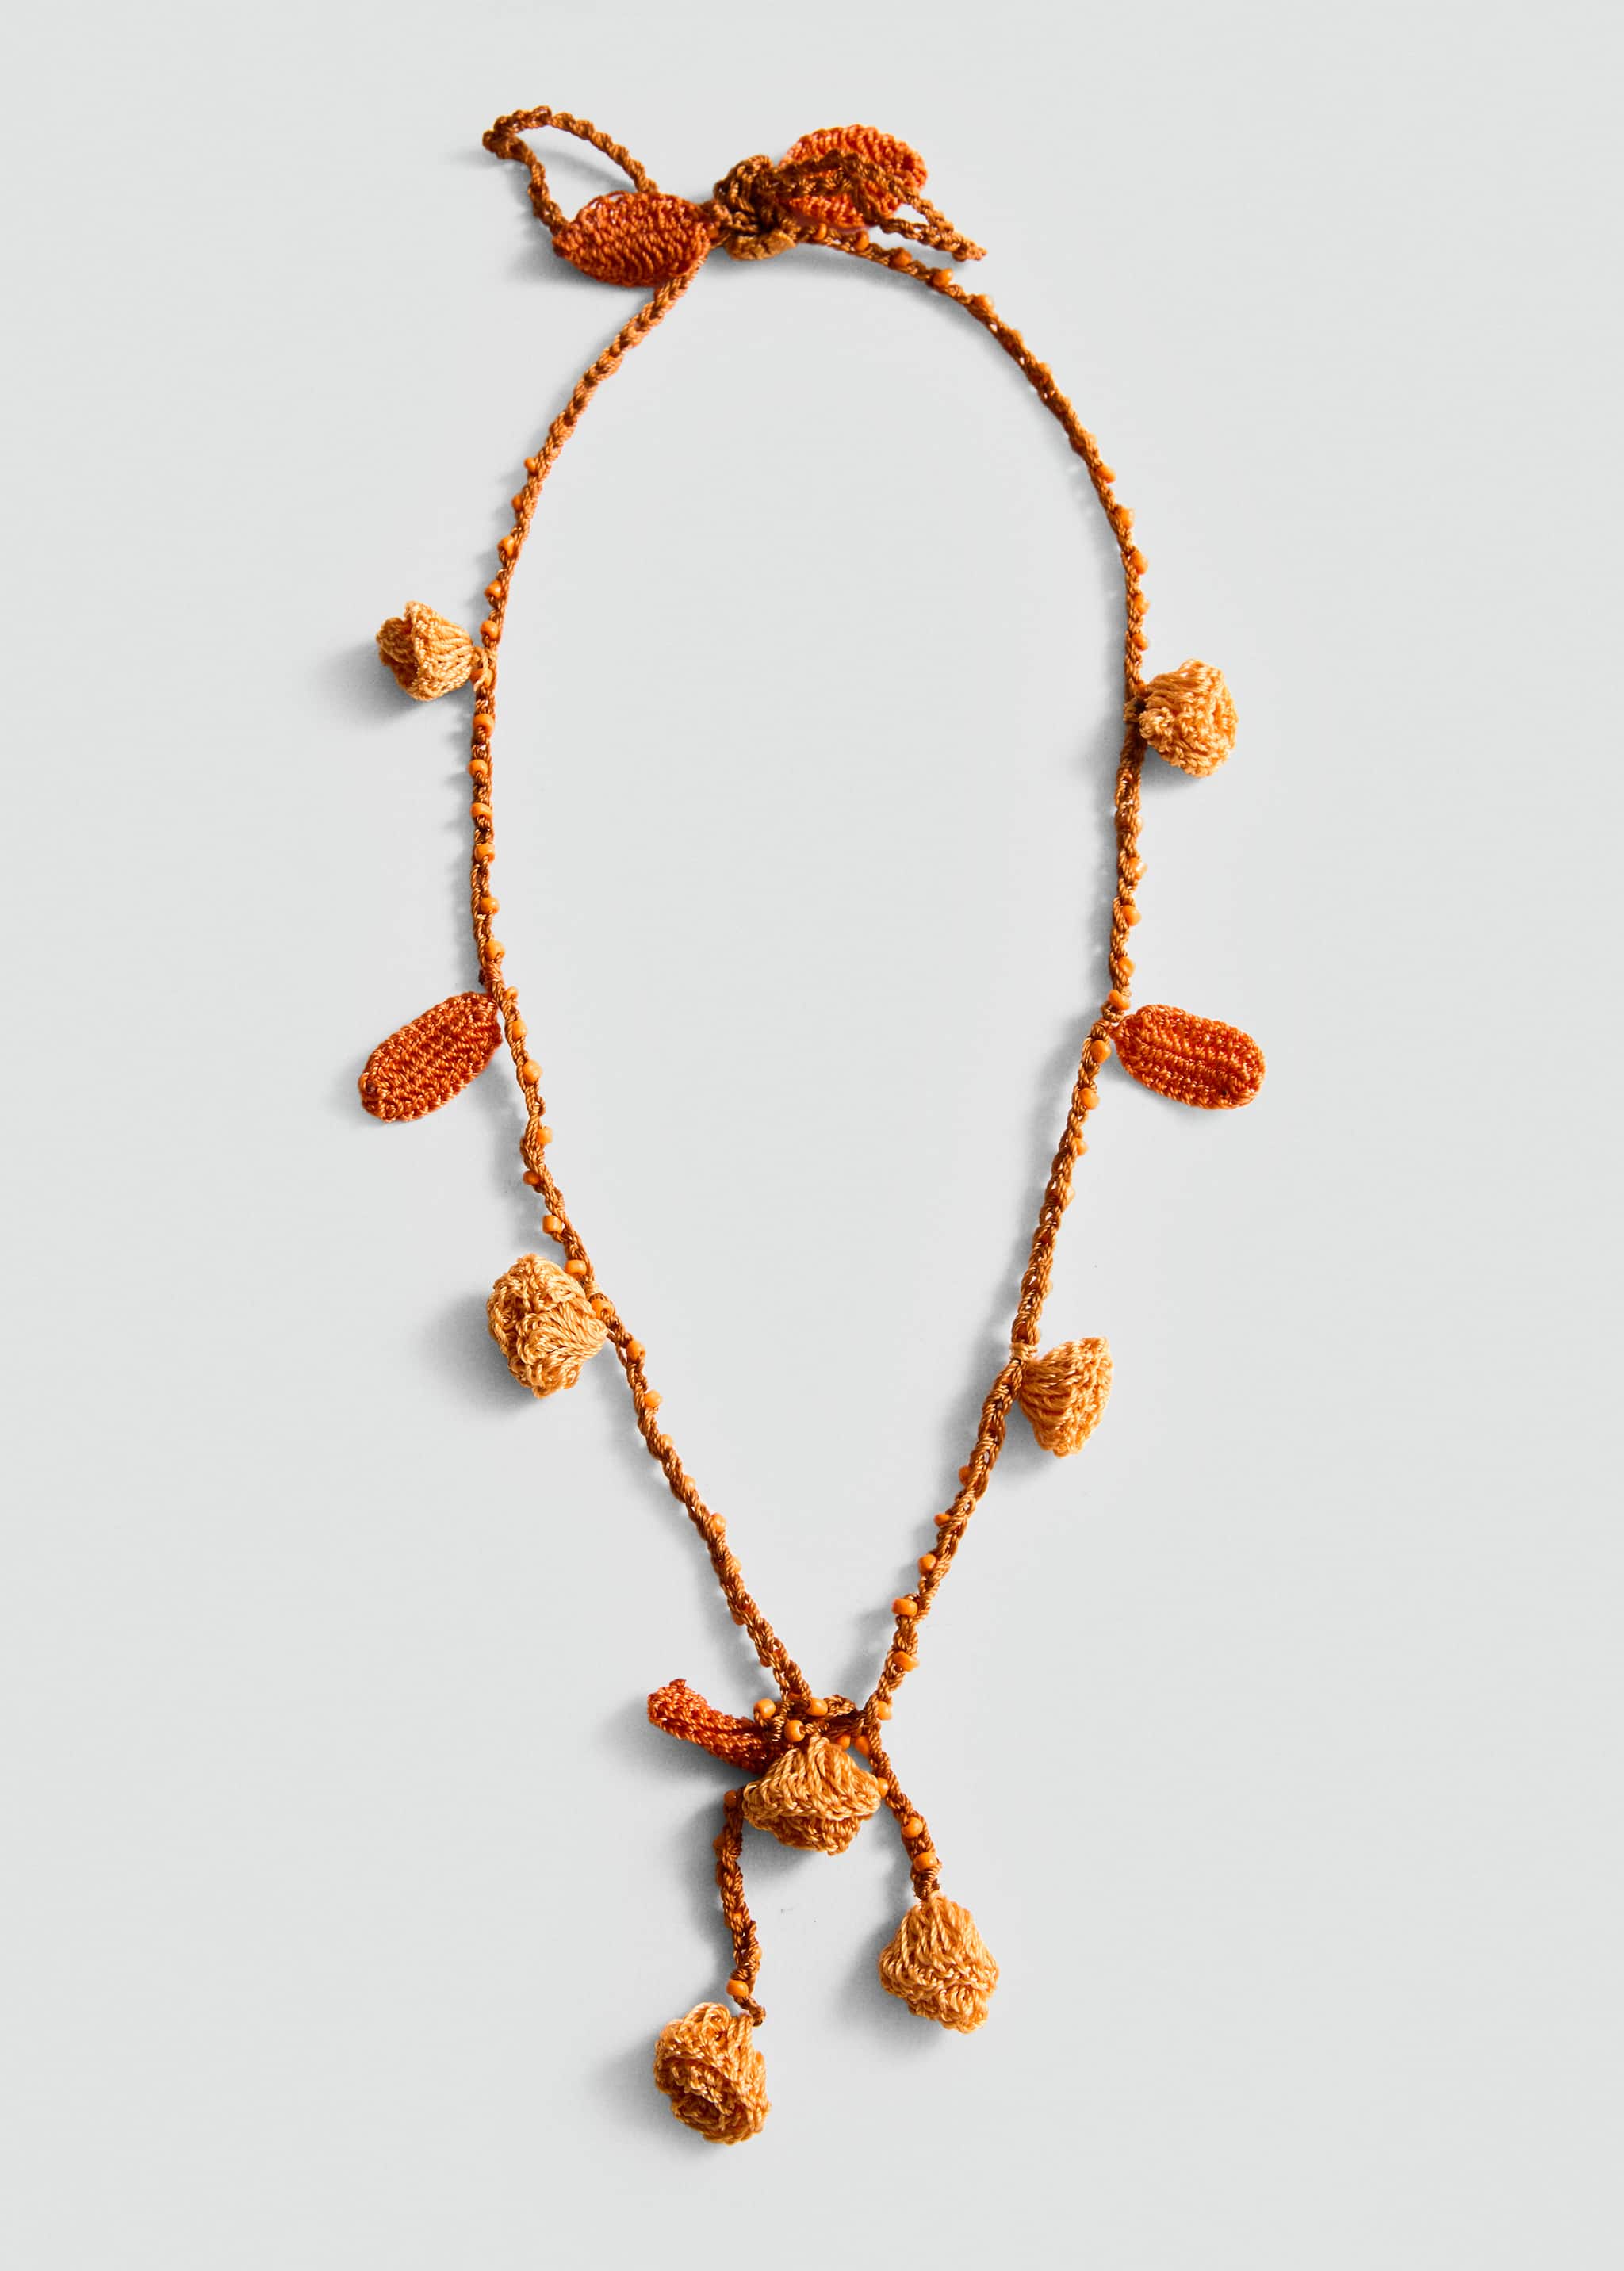 Crochet bead necklace - Article without model